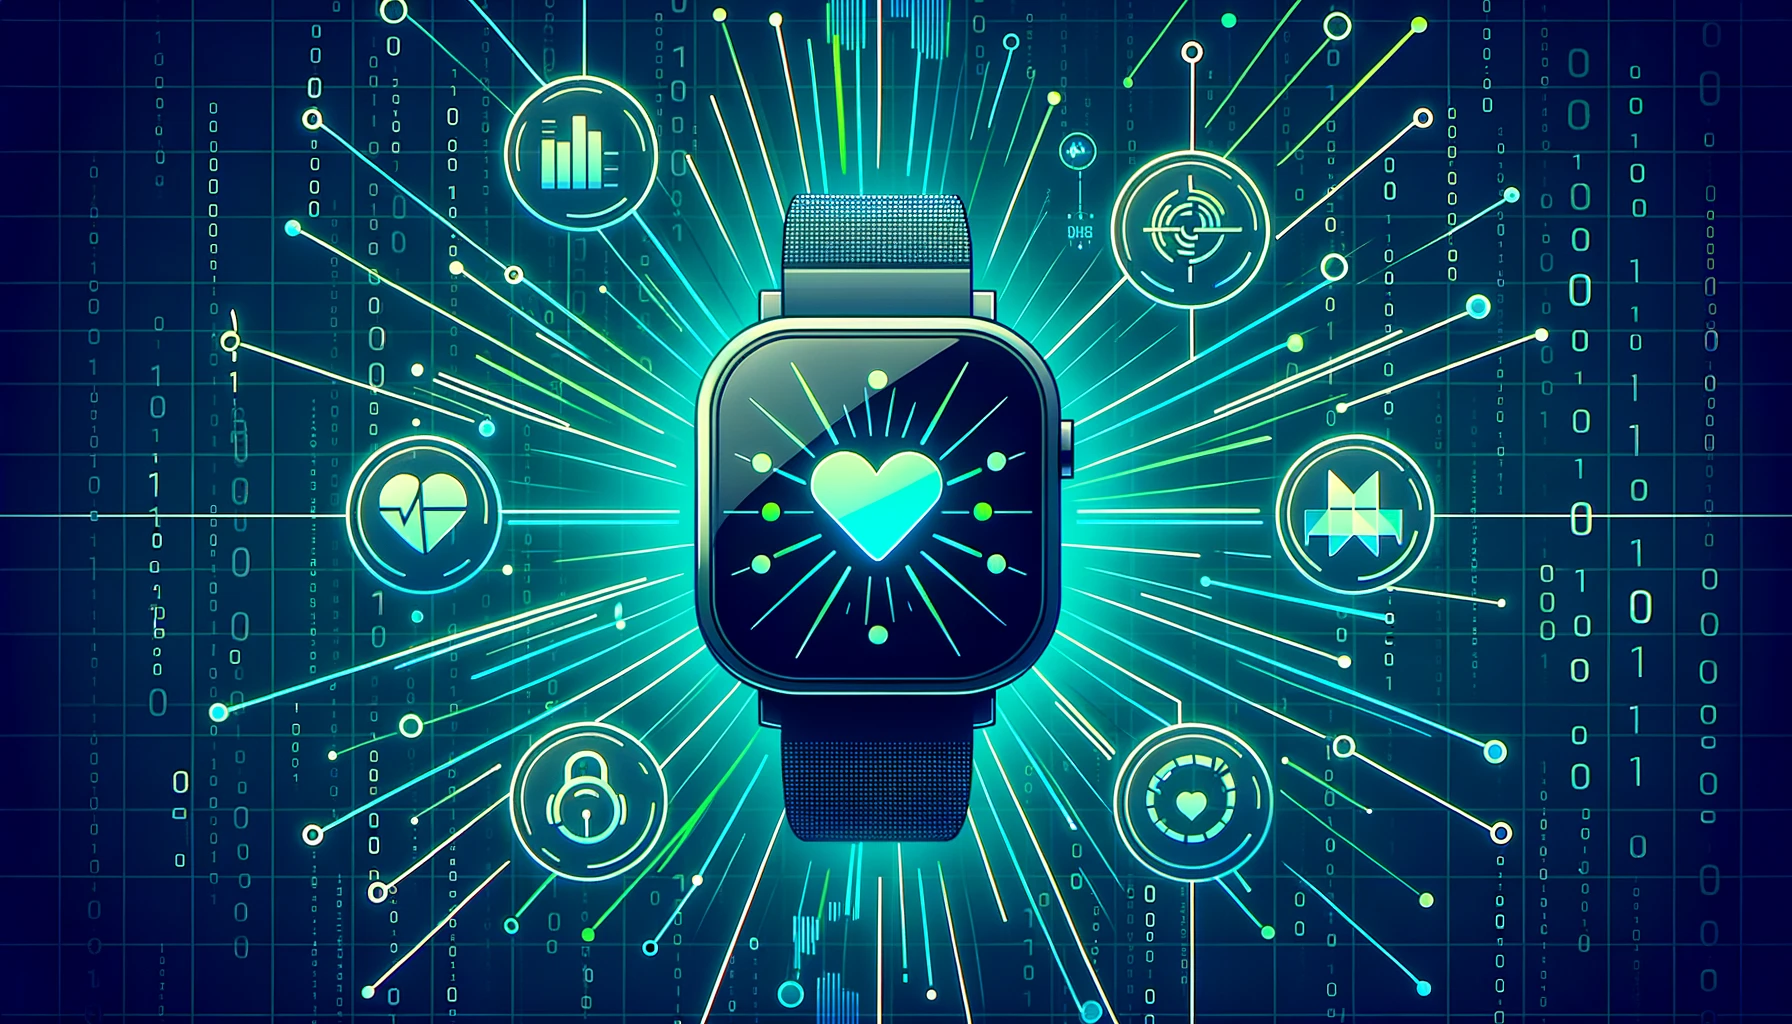 Conceptual illustration of a smartwatch connected to various fitness metrics icons.